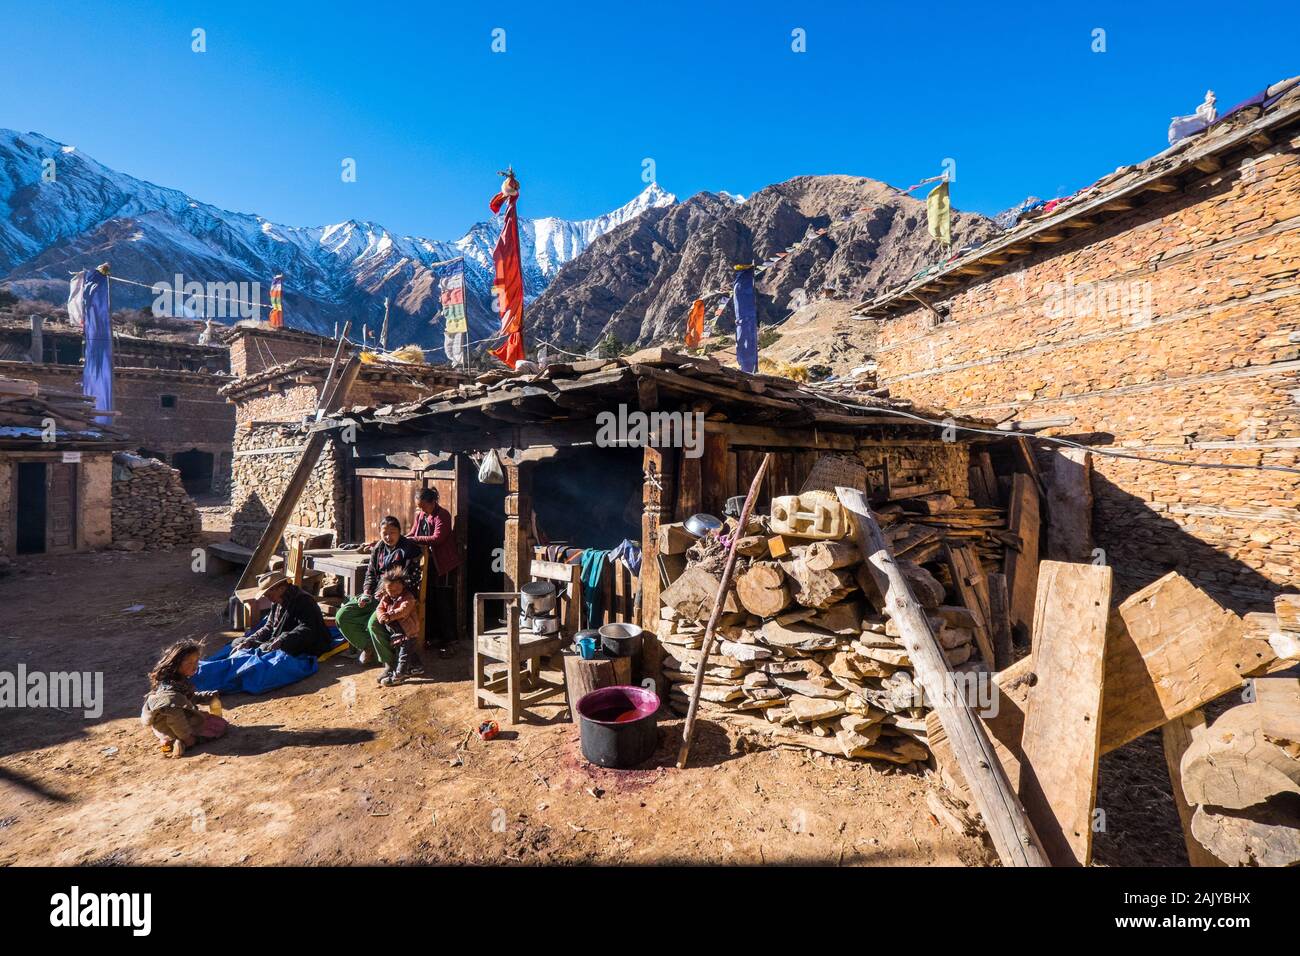 A family outside the traditional buildings in the Tibetan village of Ringmo near Phoksundo in the Dolpo region of the Nepal Himalayas Stock Photo